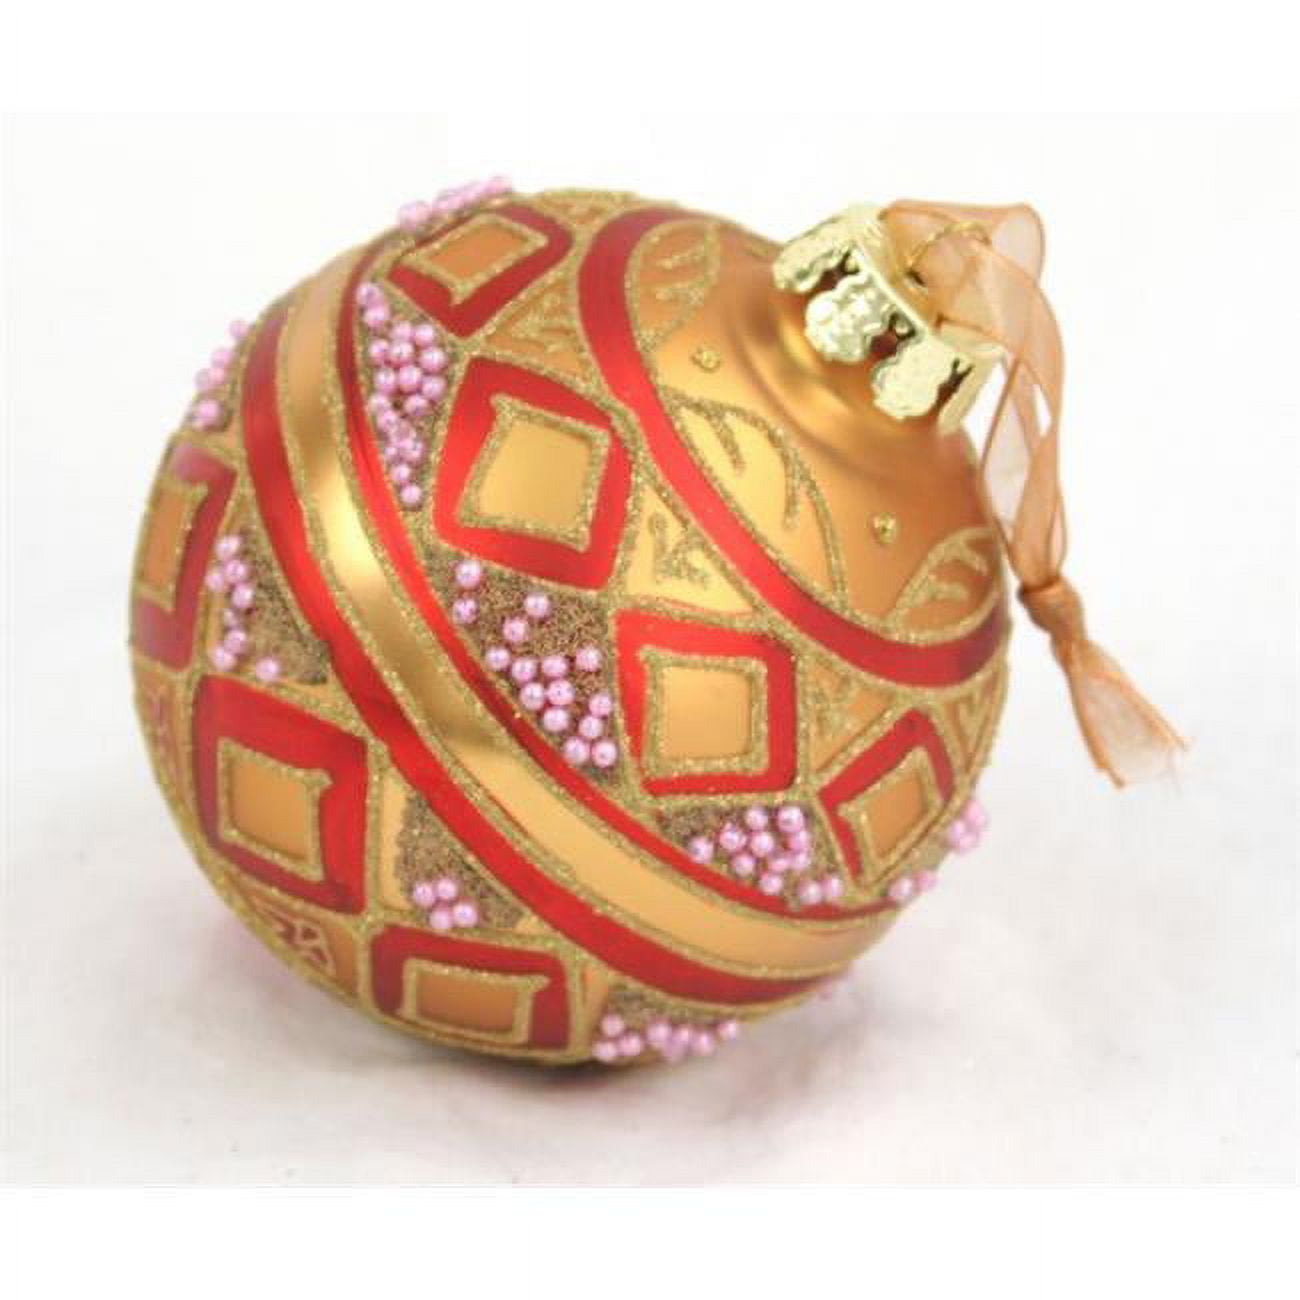 100 Mm Hand Painted Glass Ball Ornament, Burgundy & Gold